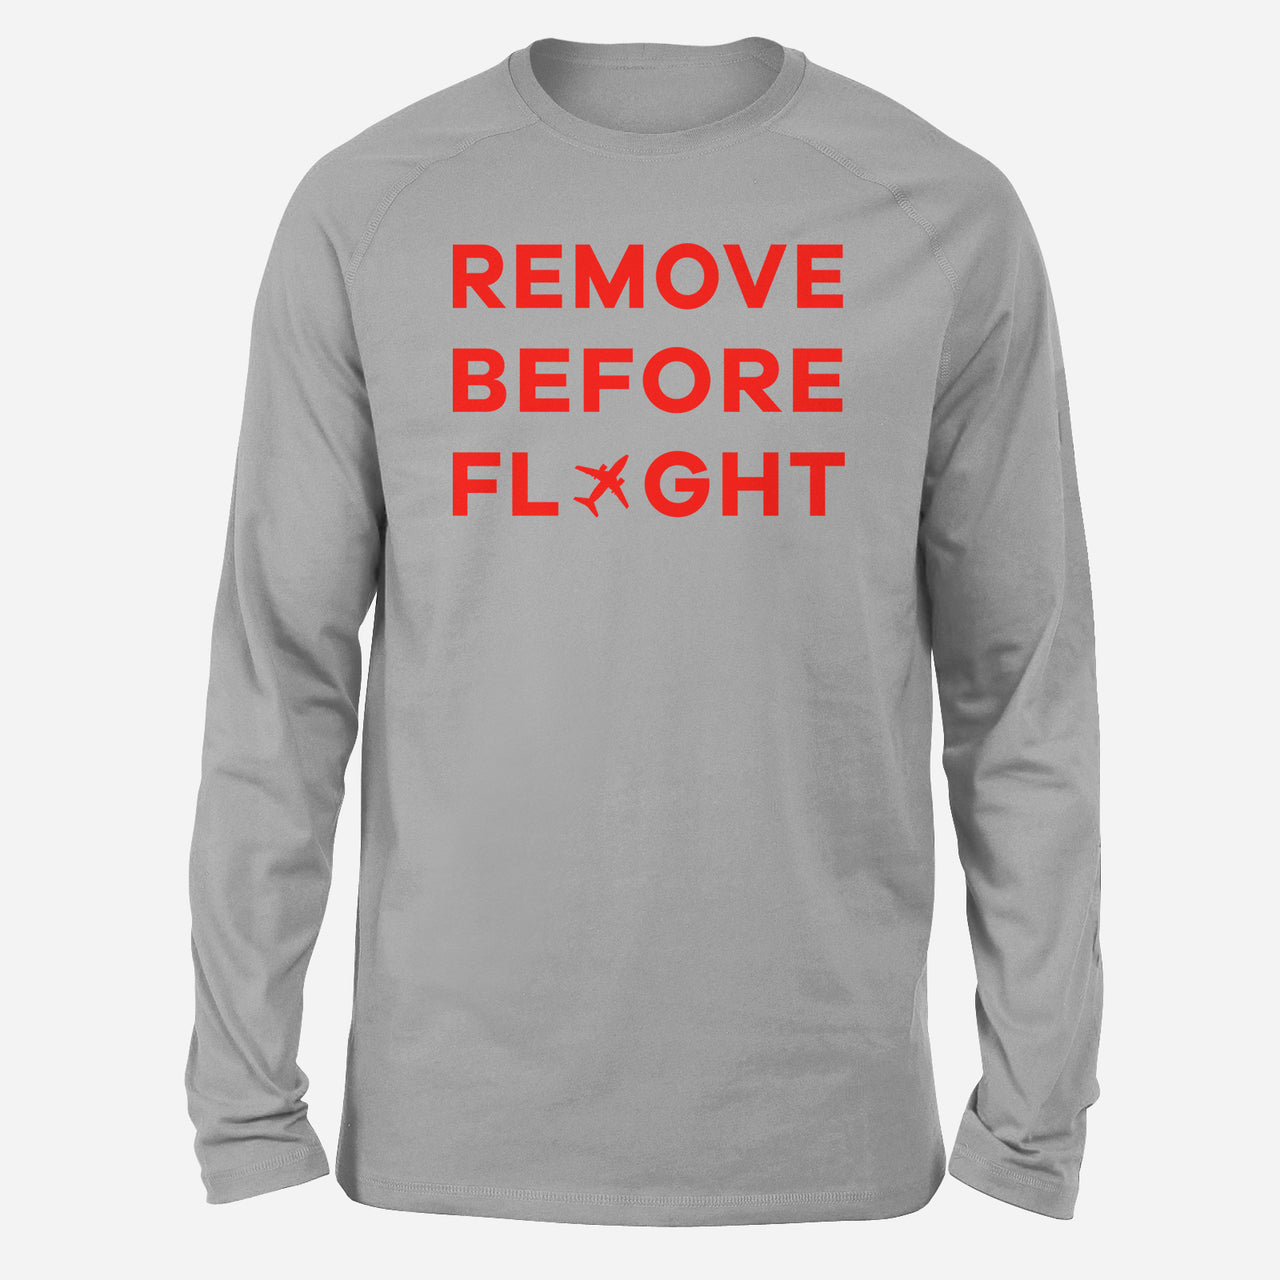 Remove Before Flight Designed Long-Sleeve T-Shirts